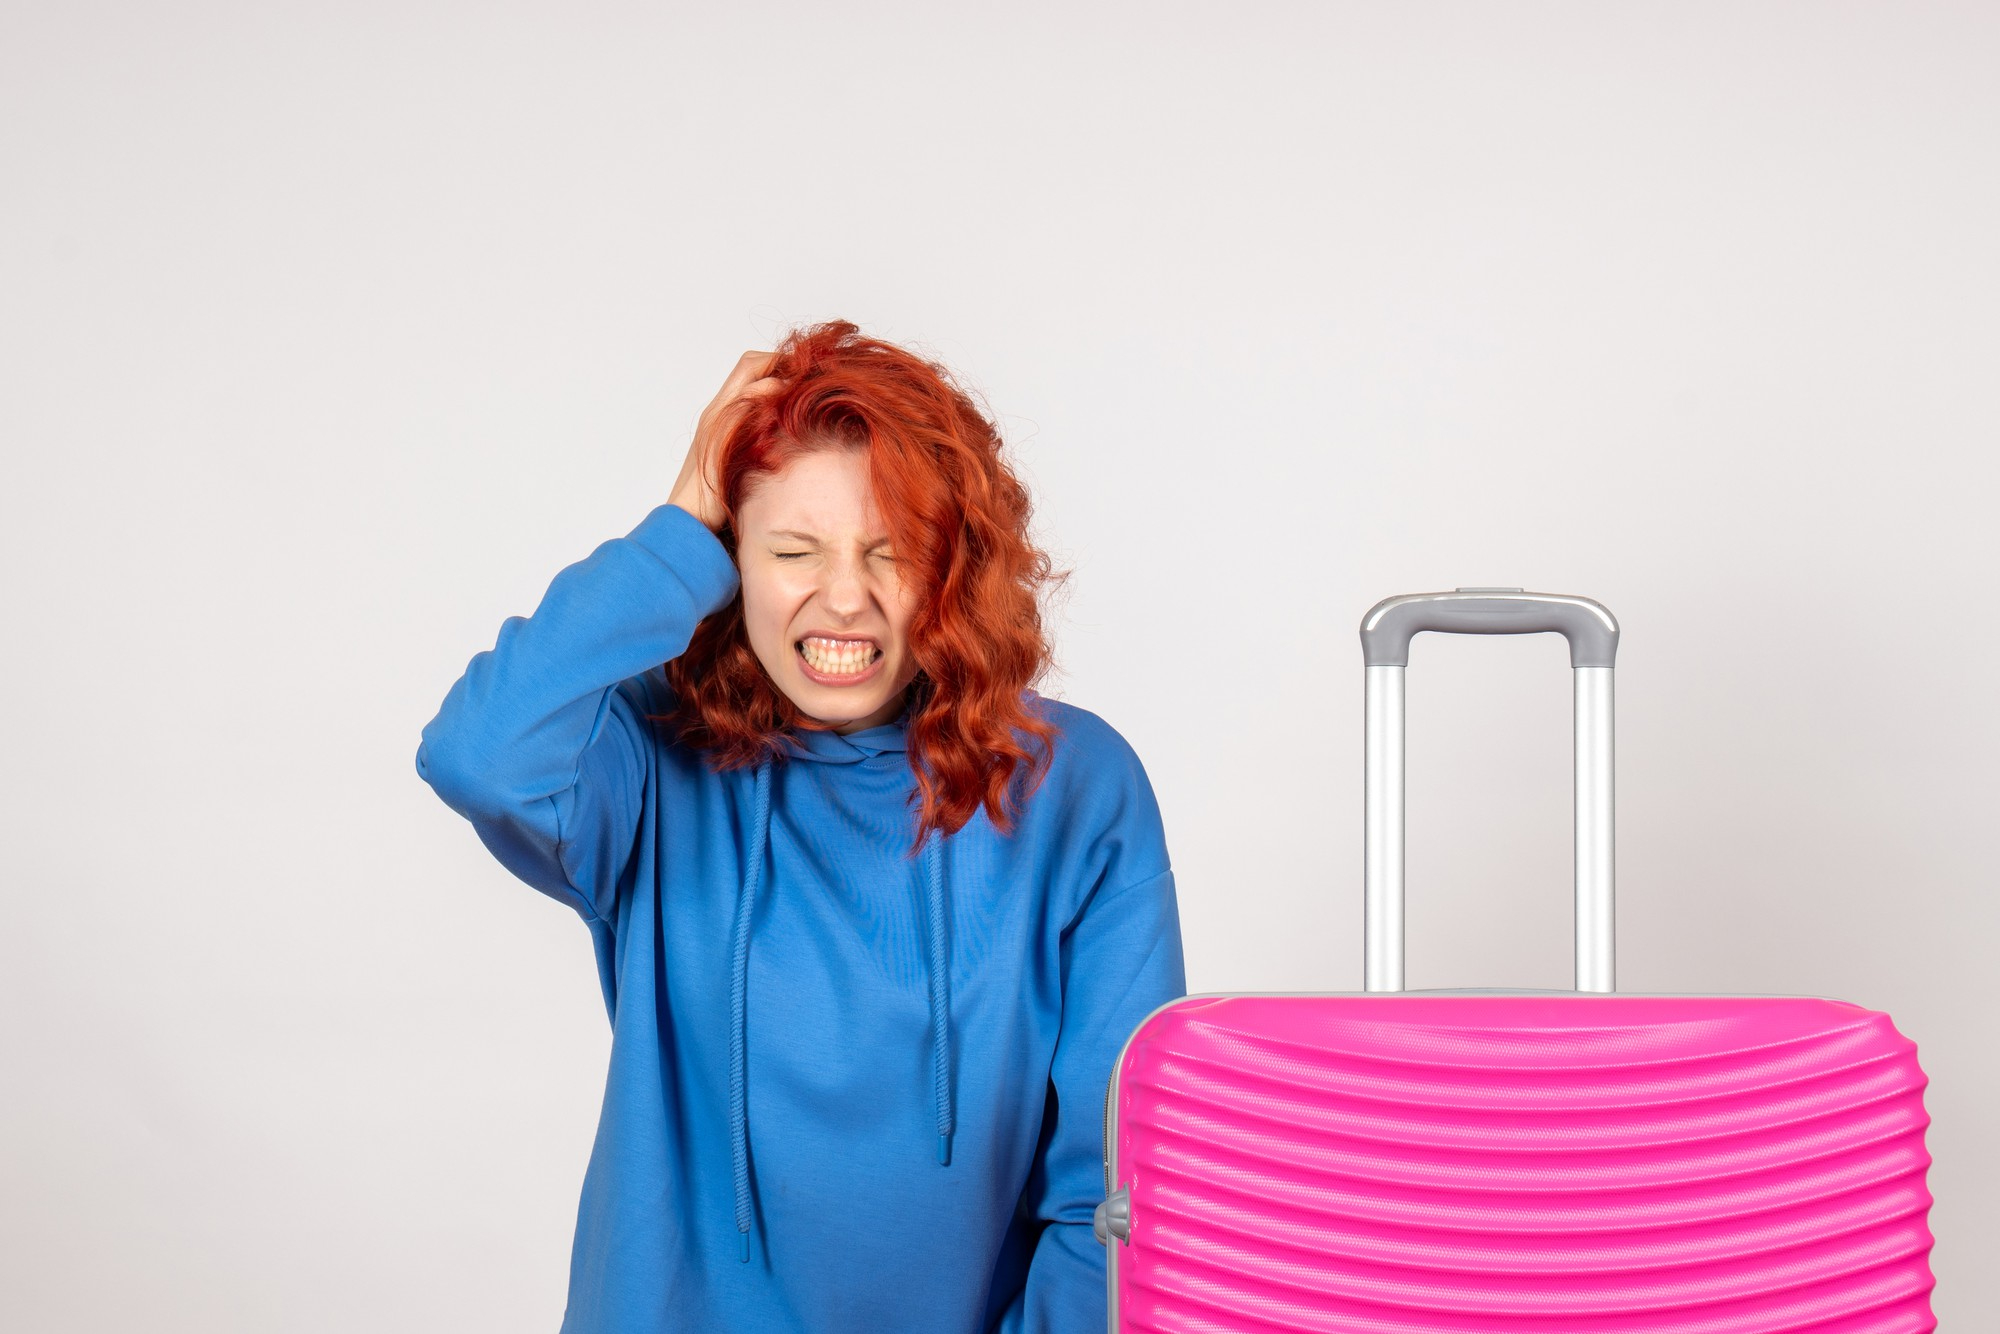 An upset woman standing with her luggage | Source: Freepik